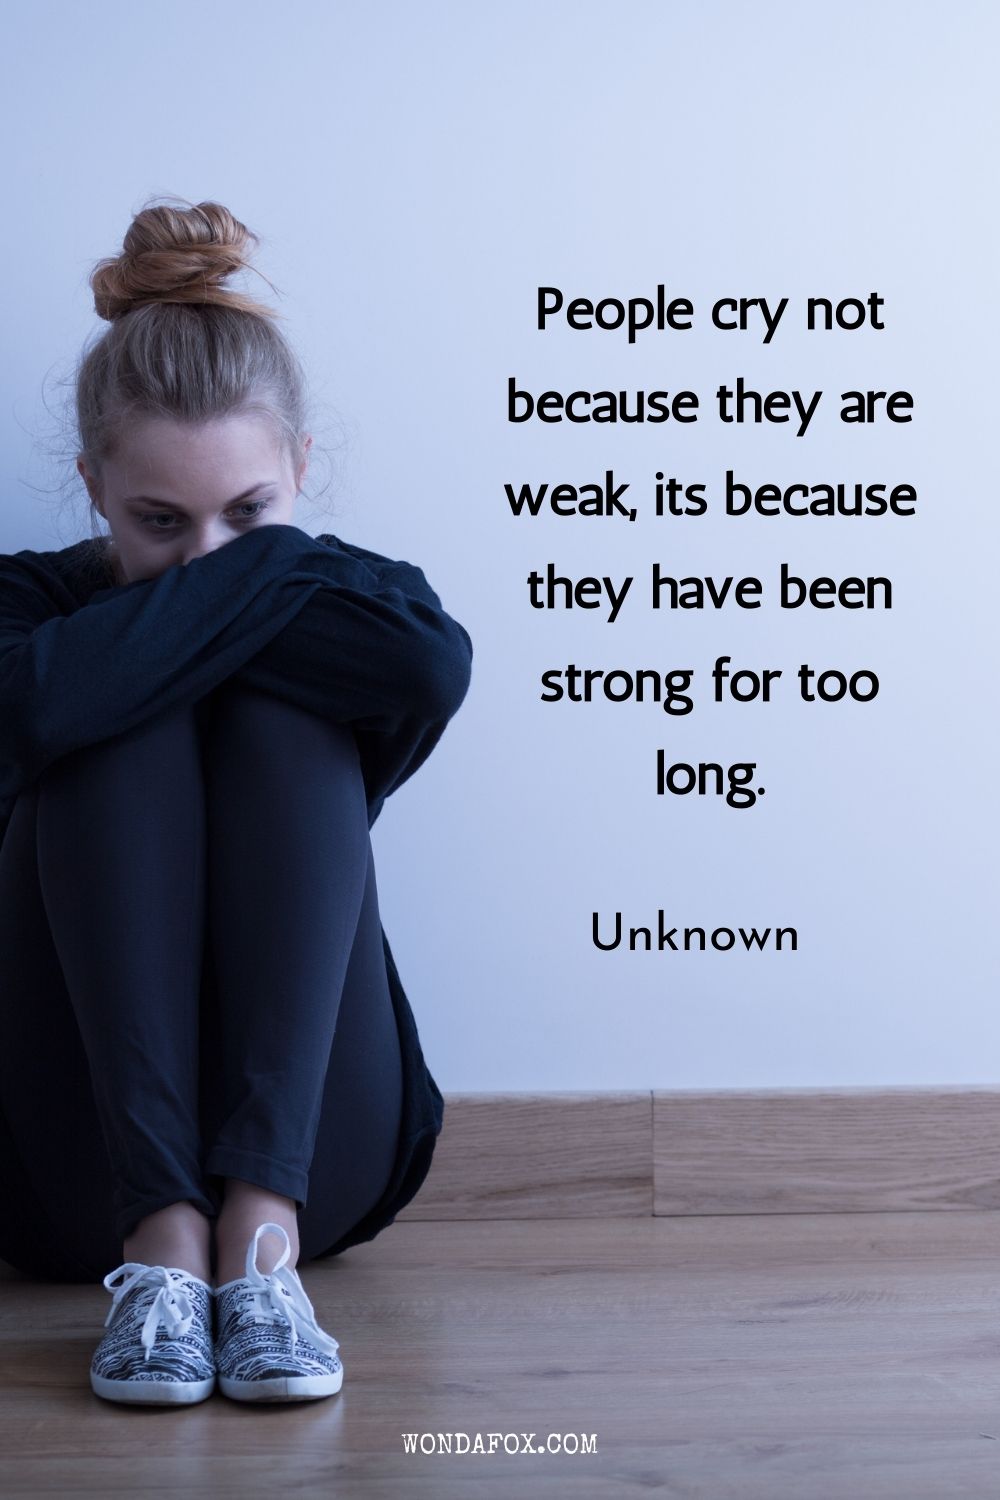 People cry not because they are weak, its because they have been strong for too long.